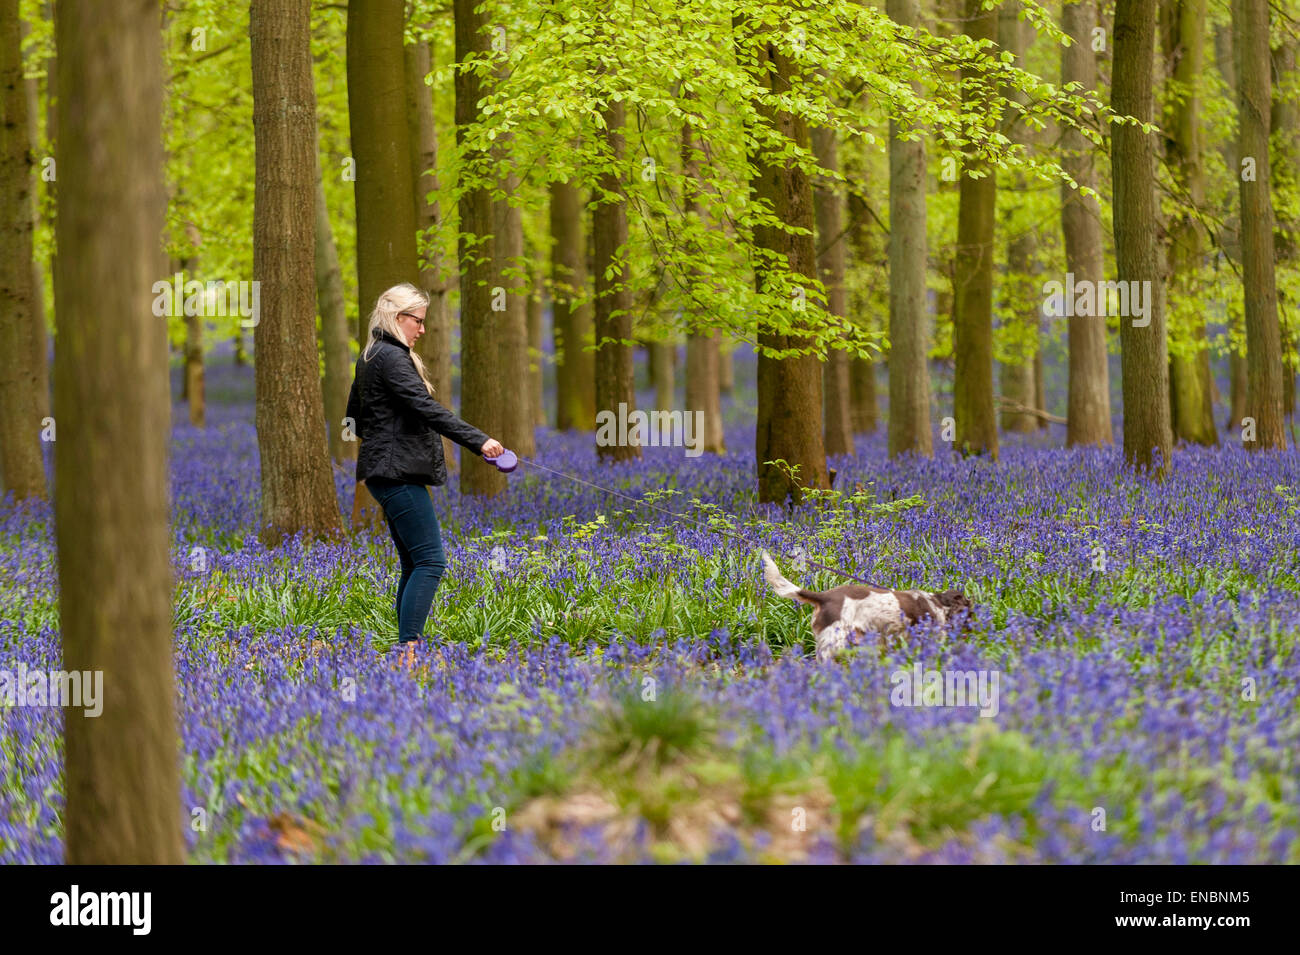 Ringshall, Hertfordshire, UK. 1 May 2015. A woman walks her dog through the bluebells.  Just in time for the early May bank holiday, the bluebells are nearly in full bloom in Dockey Wood, part of the Ashridge Estate. This wood is renowned for its carpet of bluebells every spring and is regarded as one of the finest examples in the country.  Credit:  Stephen Chung / Alamy Live News Stock Photo